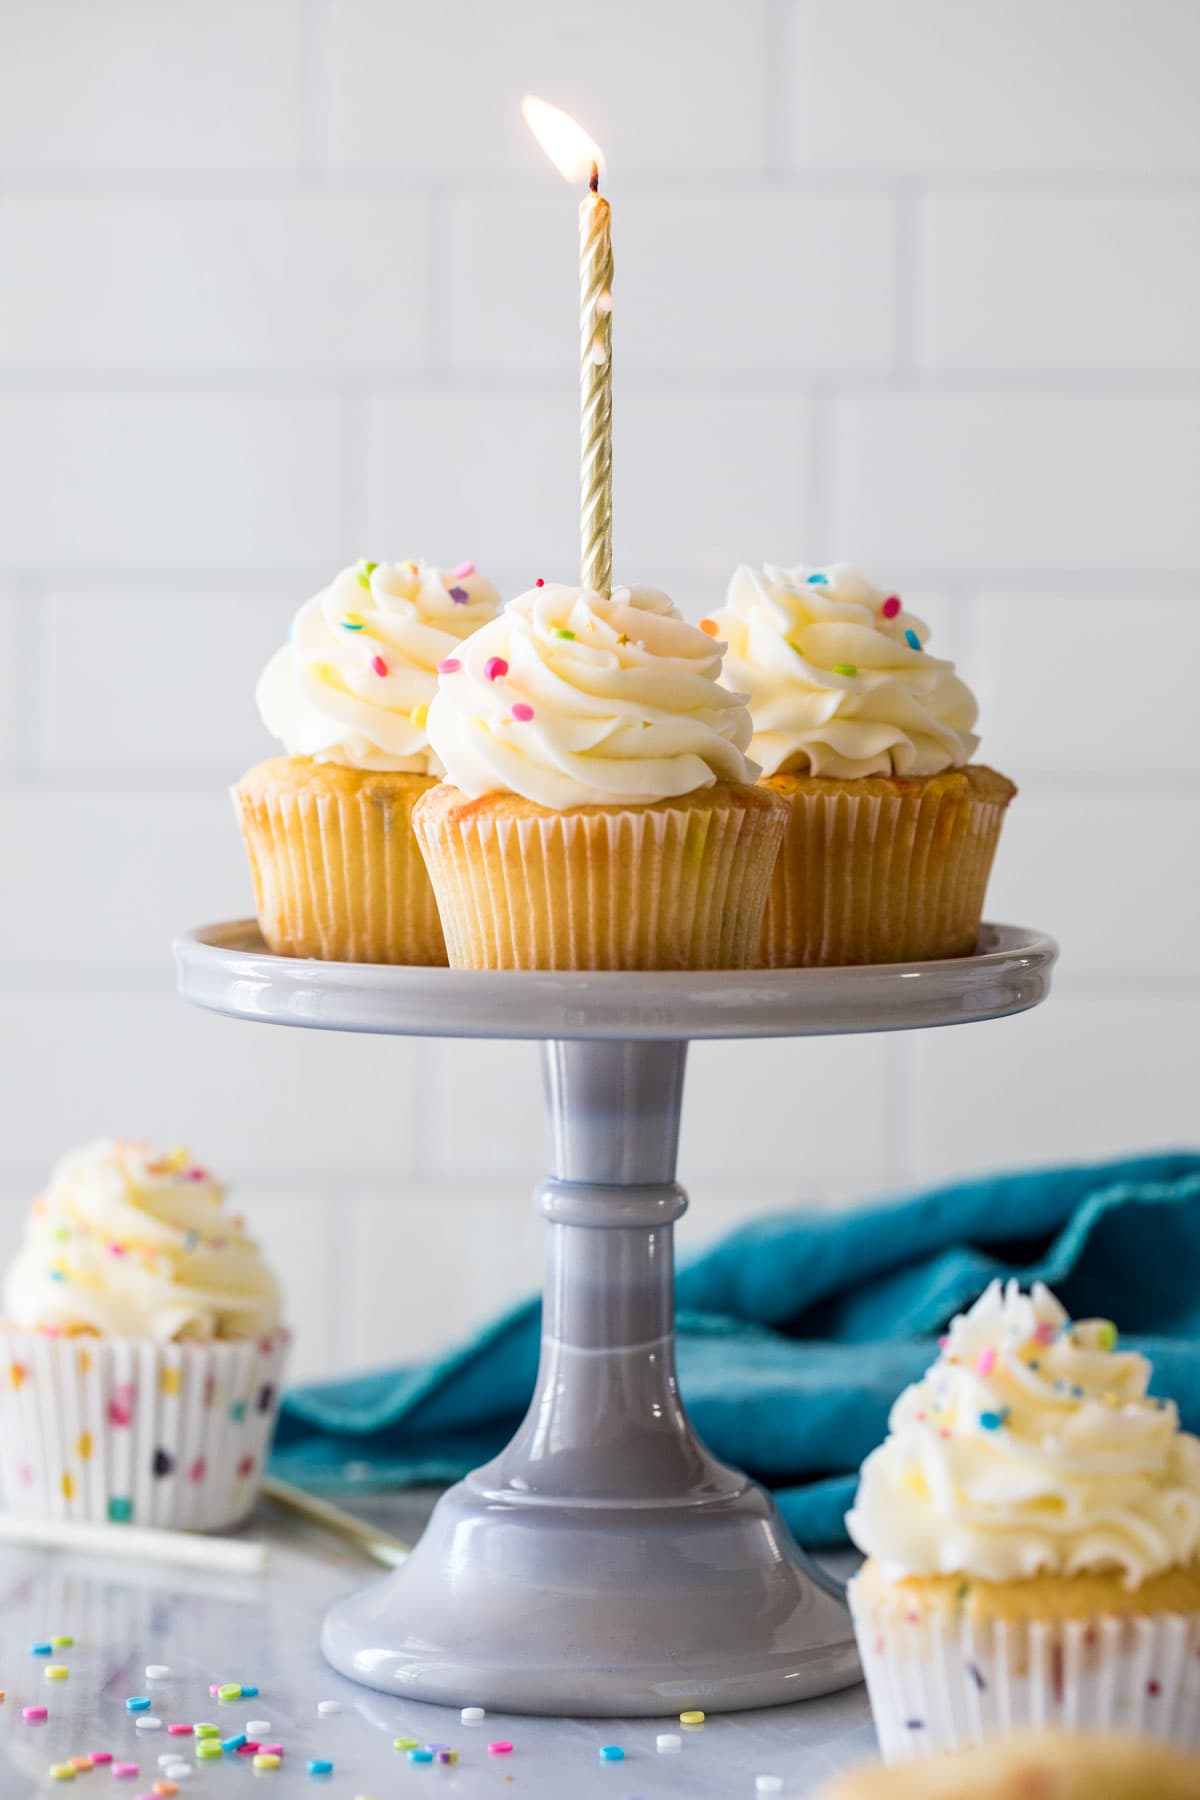 Four birthday cupcakes on a cake stand with a lit gold birthday candle in the front cupcake.